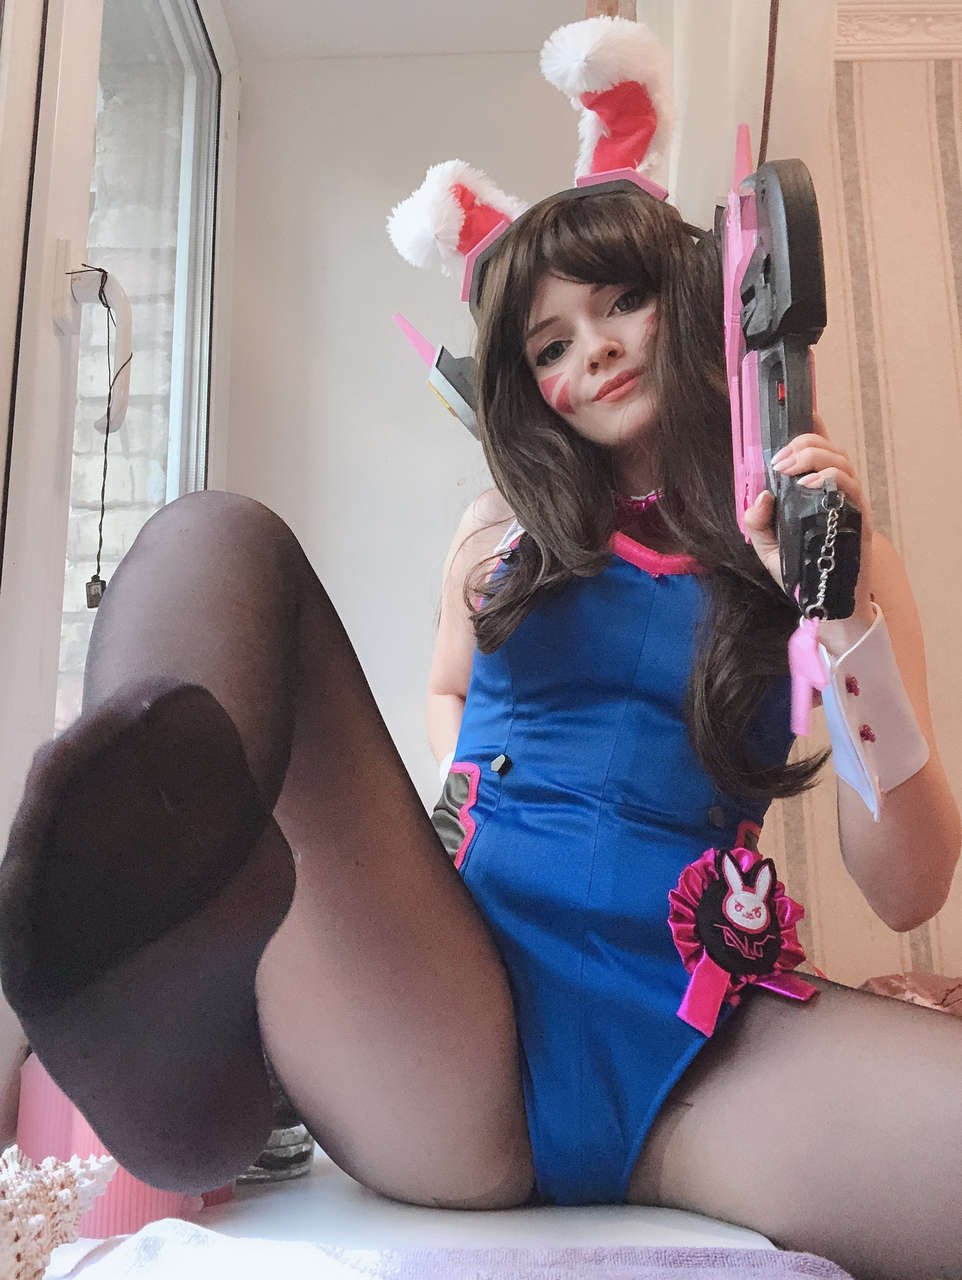 Will You Play With This Naughty Bunbun She Wants To Play With You D Va By Evenink Cospla